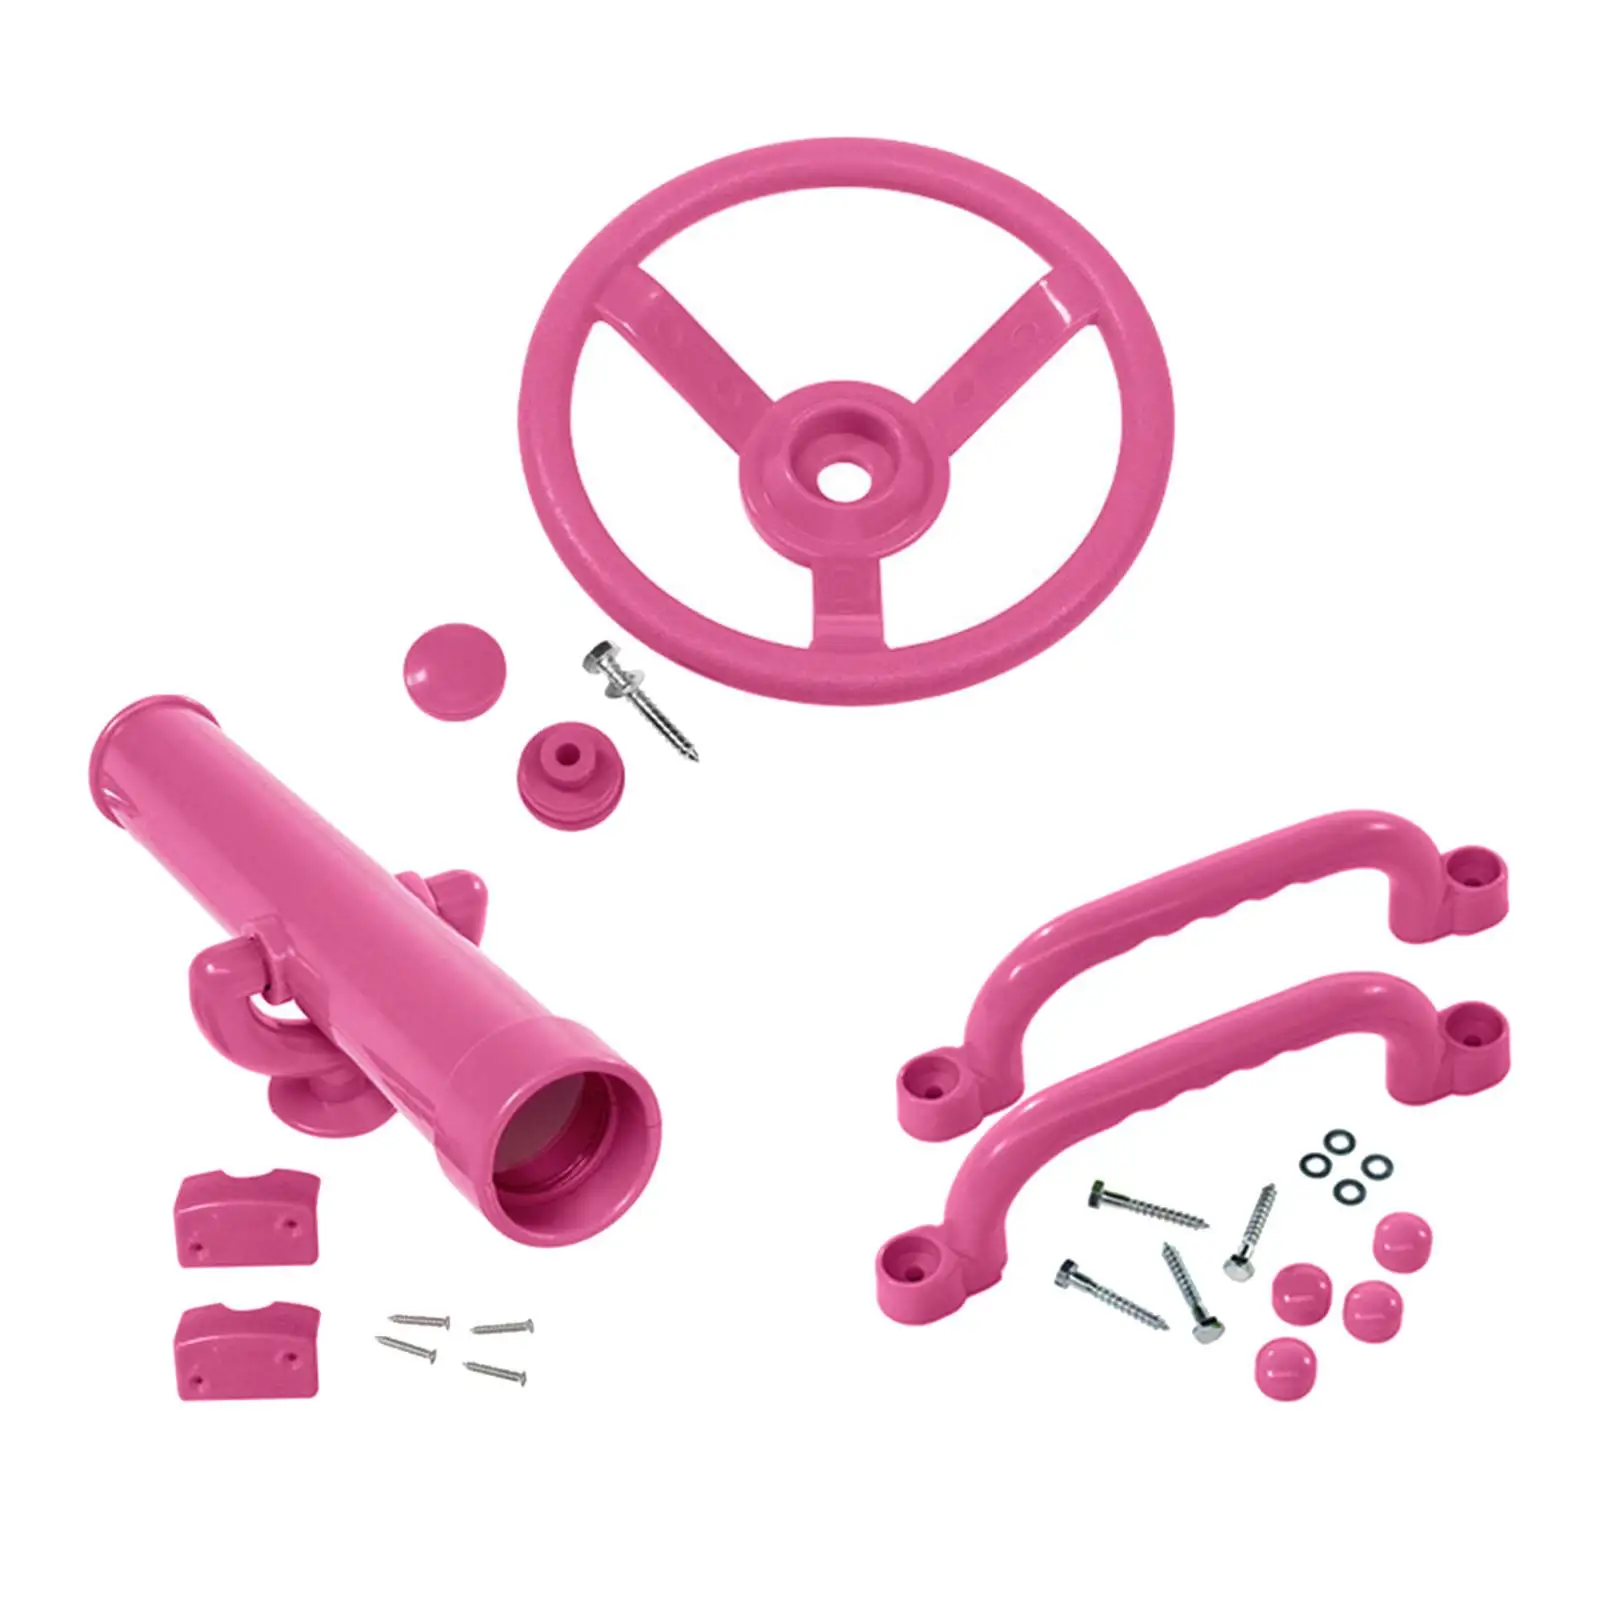 Playground Equipment Pink Set Valentines Day Gifts Pirate Ship Parts for Backyard Jungle Gym Climbing Frame Playhouse Treehouse